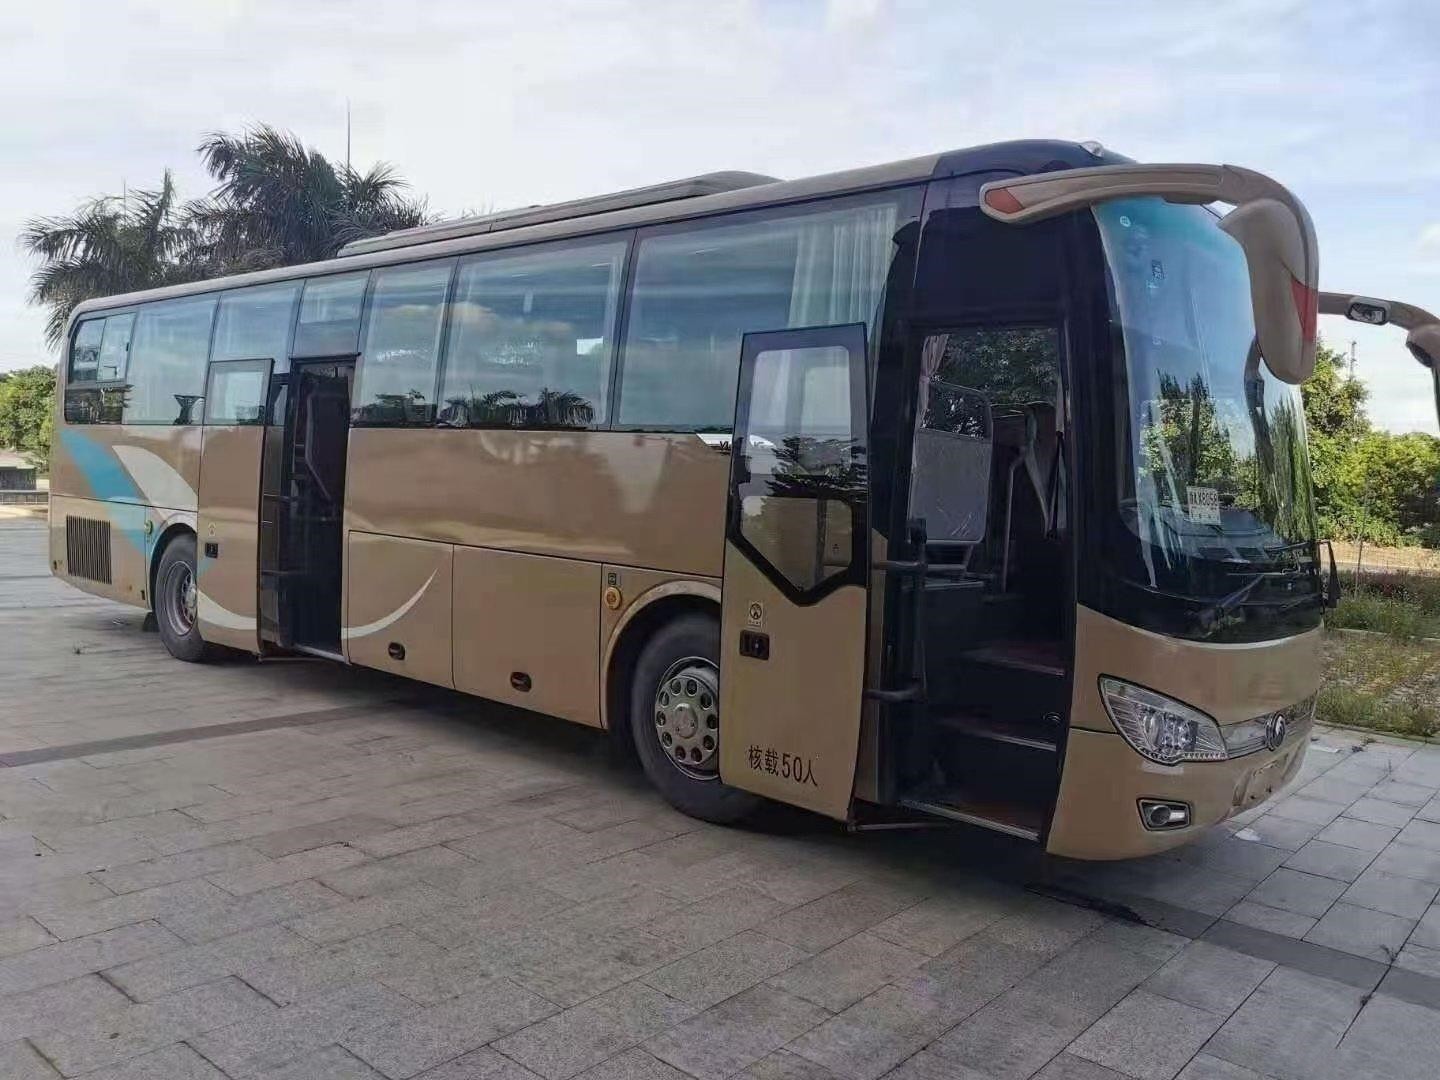 Used City Yutong Buses Long Trip Used Tour Buses Public Transport Used Buses